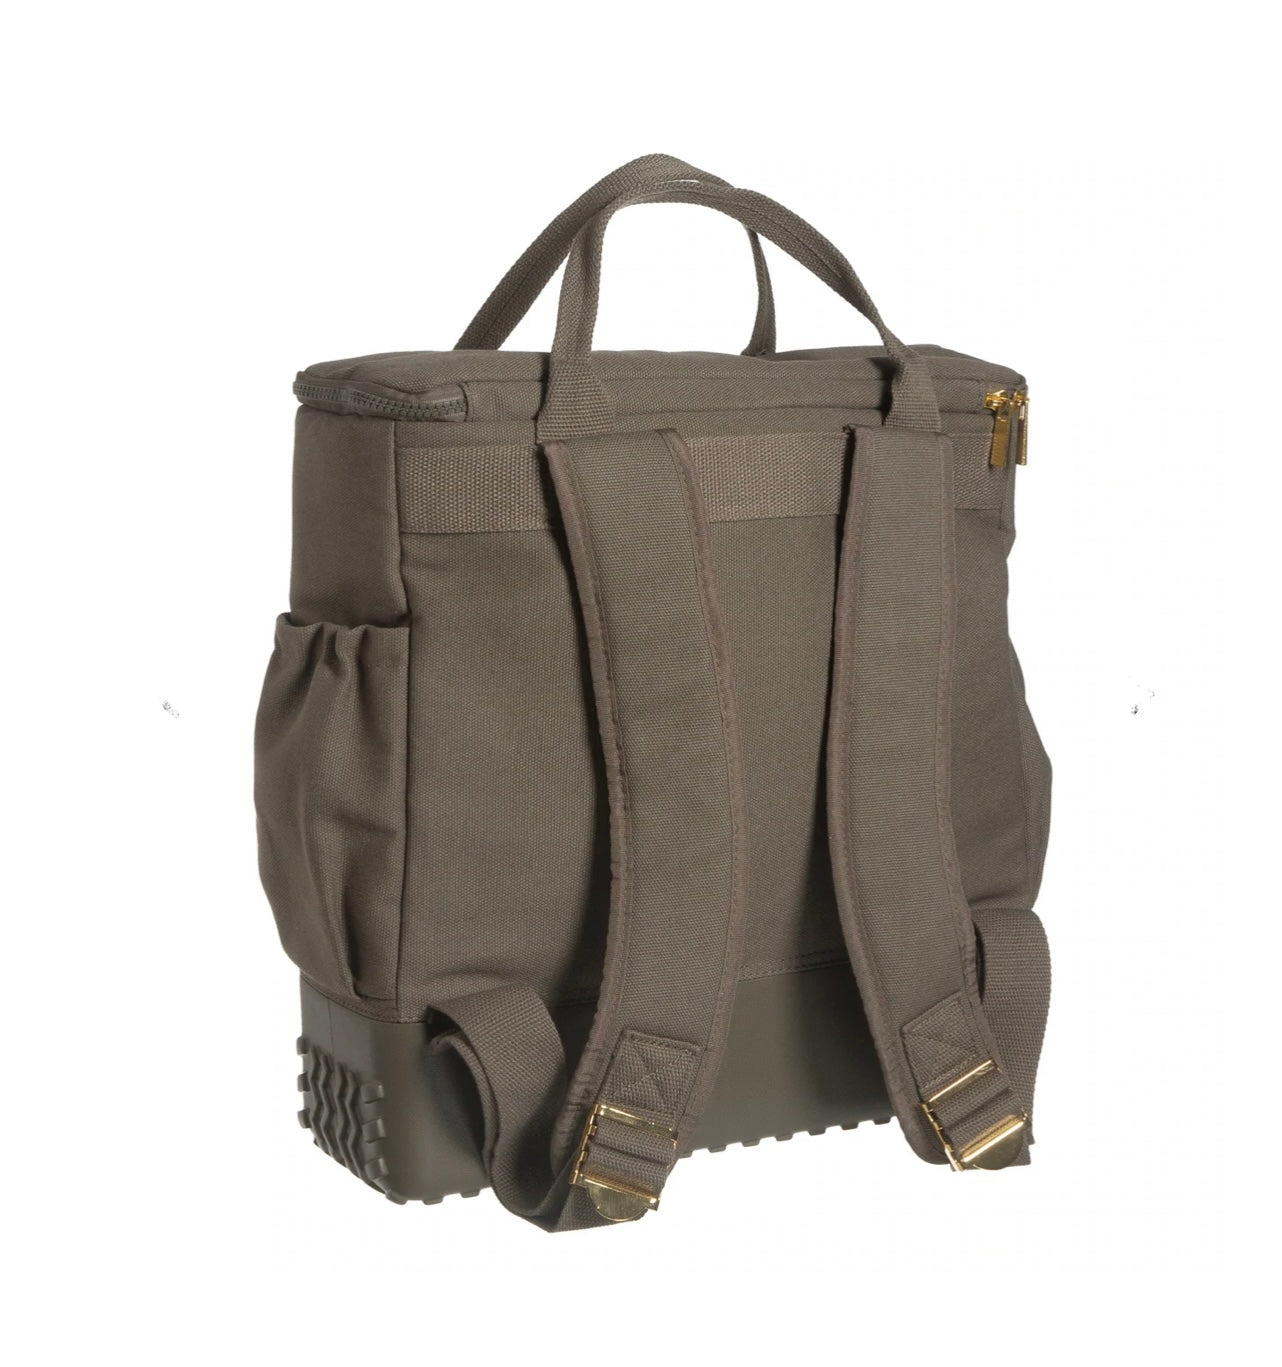 Bogg Bag Canvas Collection Backpack Olive – The Bugs Ear